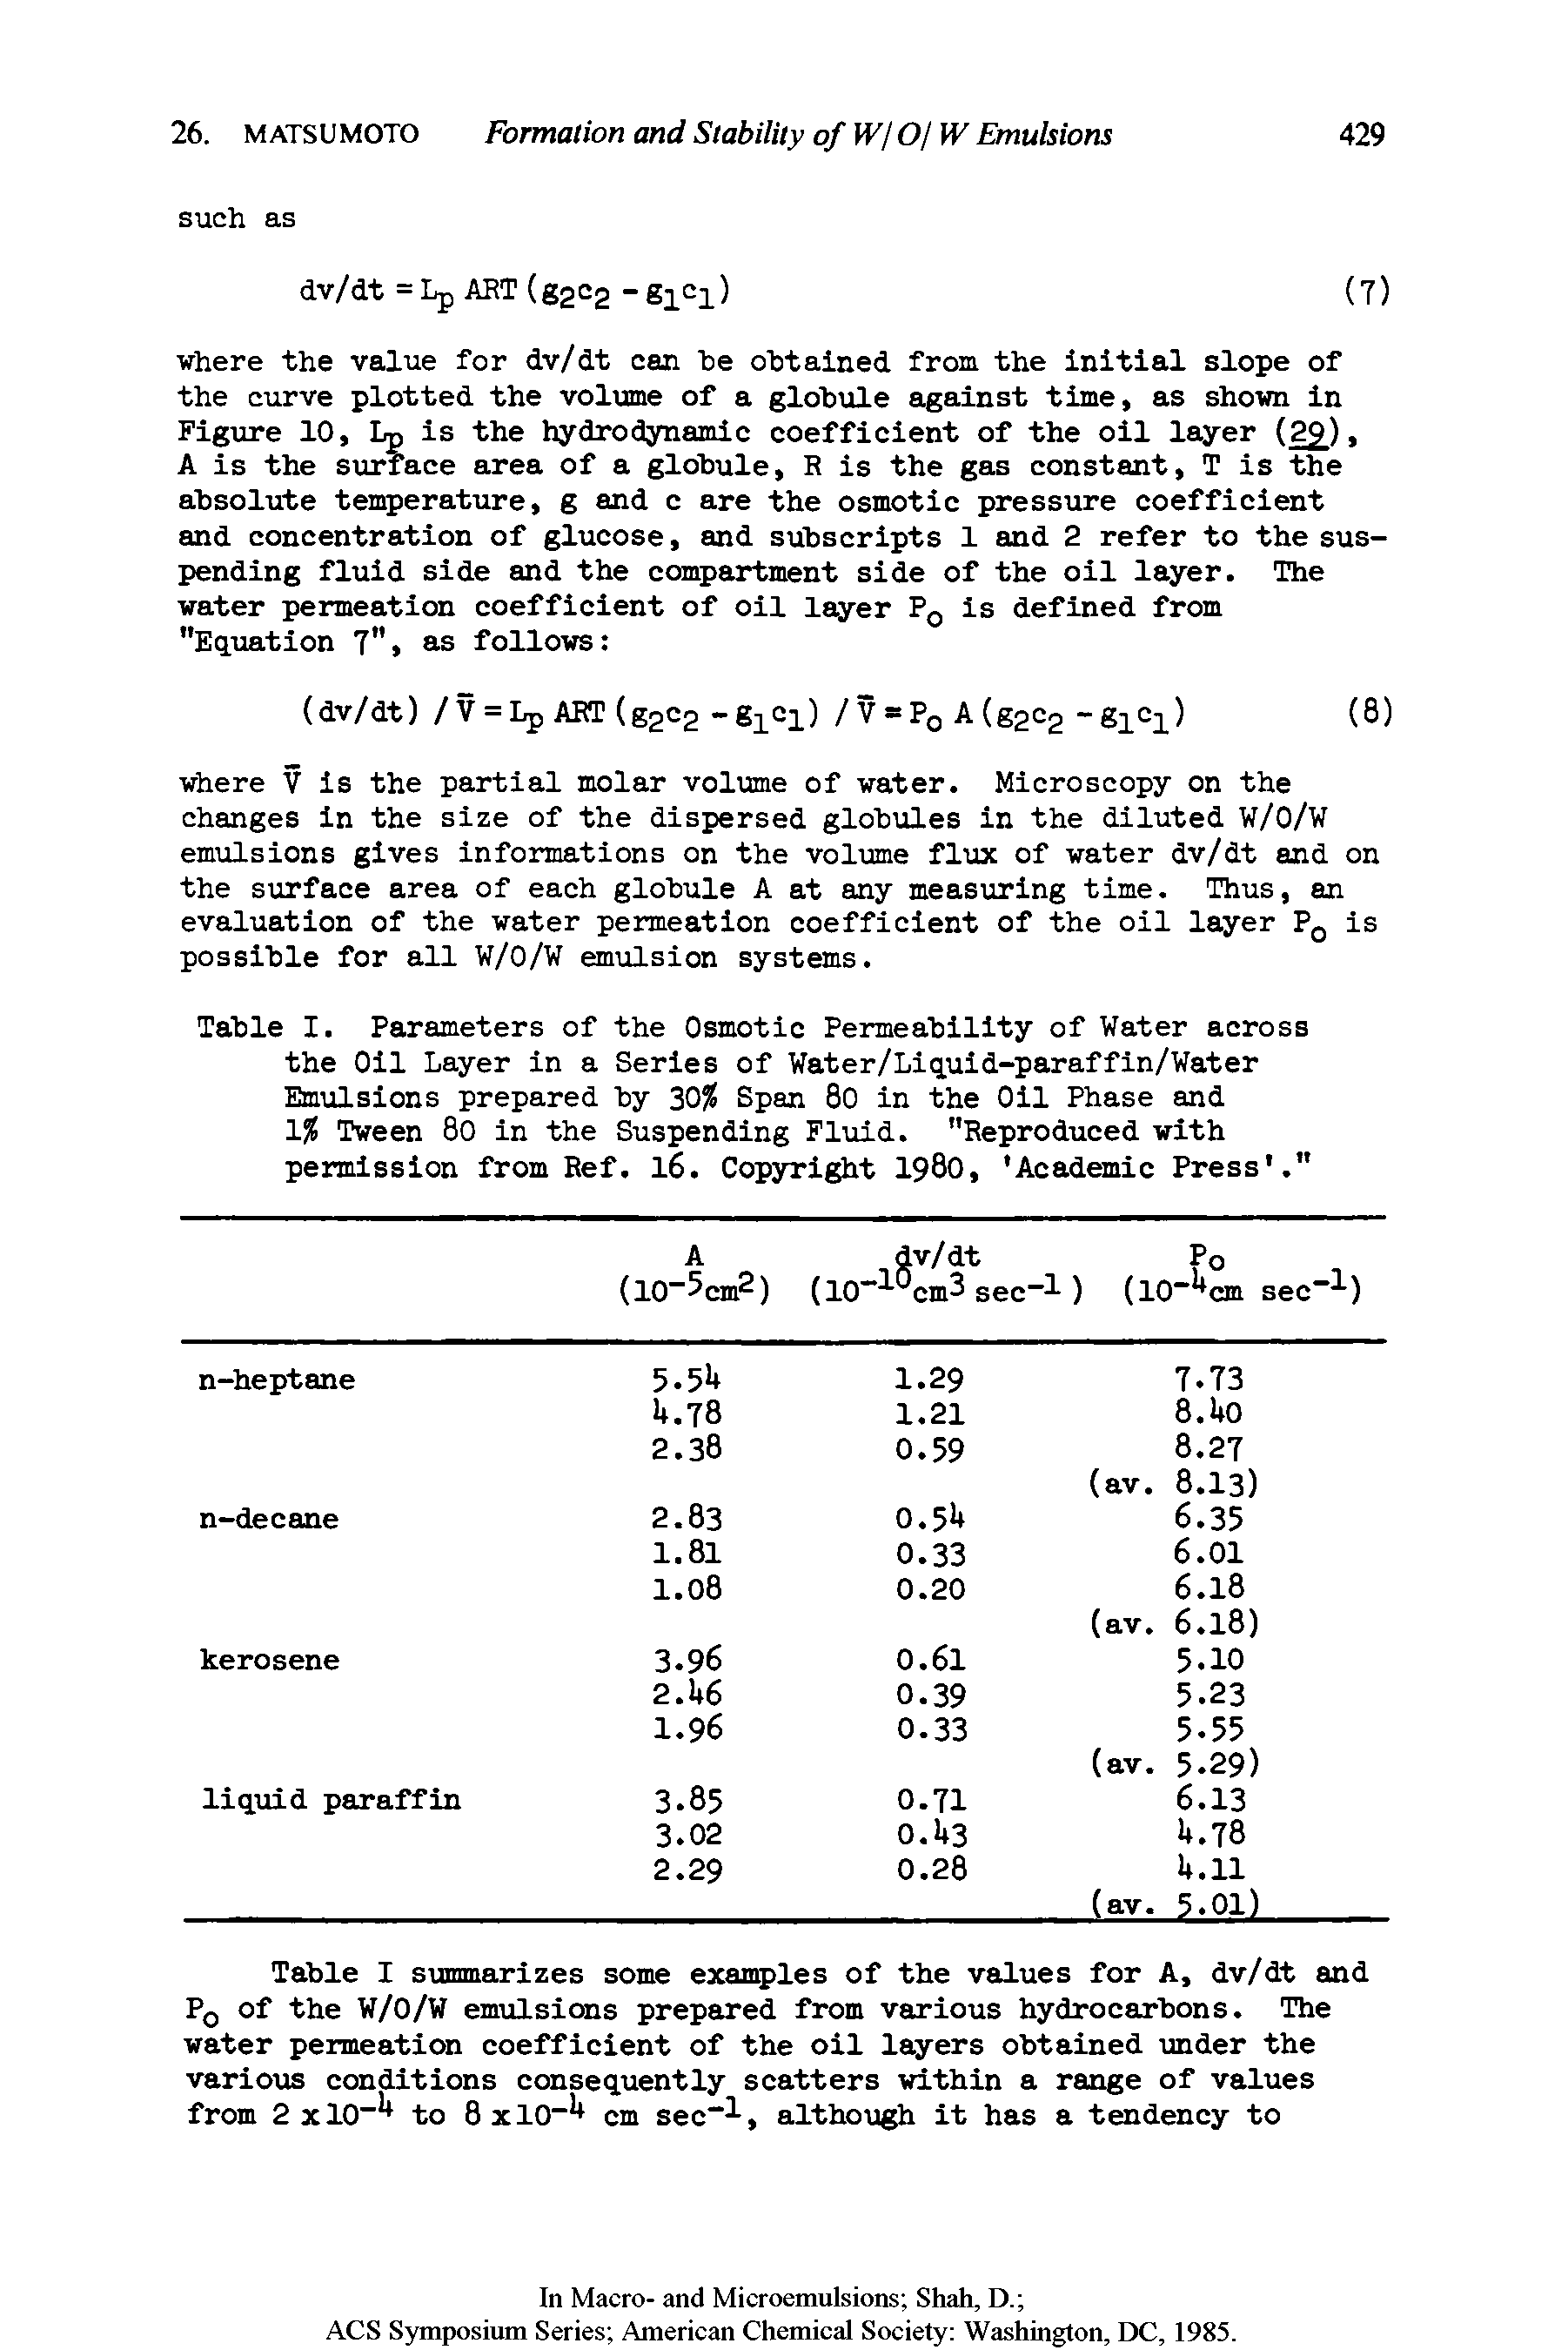 Table I. Parameters of the Osmotic Permeability of Water across the Oil Layer in a Series of Water/Liquid-paraffin/Water Emulsions prepared by 30 Span 80 in the Oil Phase and 1% Tween 80 in the Suspending Fluid. "Reproduced with permission from Ref. 16. Copyright 1900, Academic Press. "...